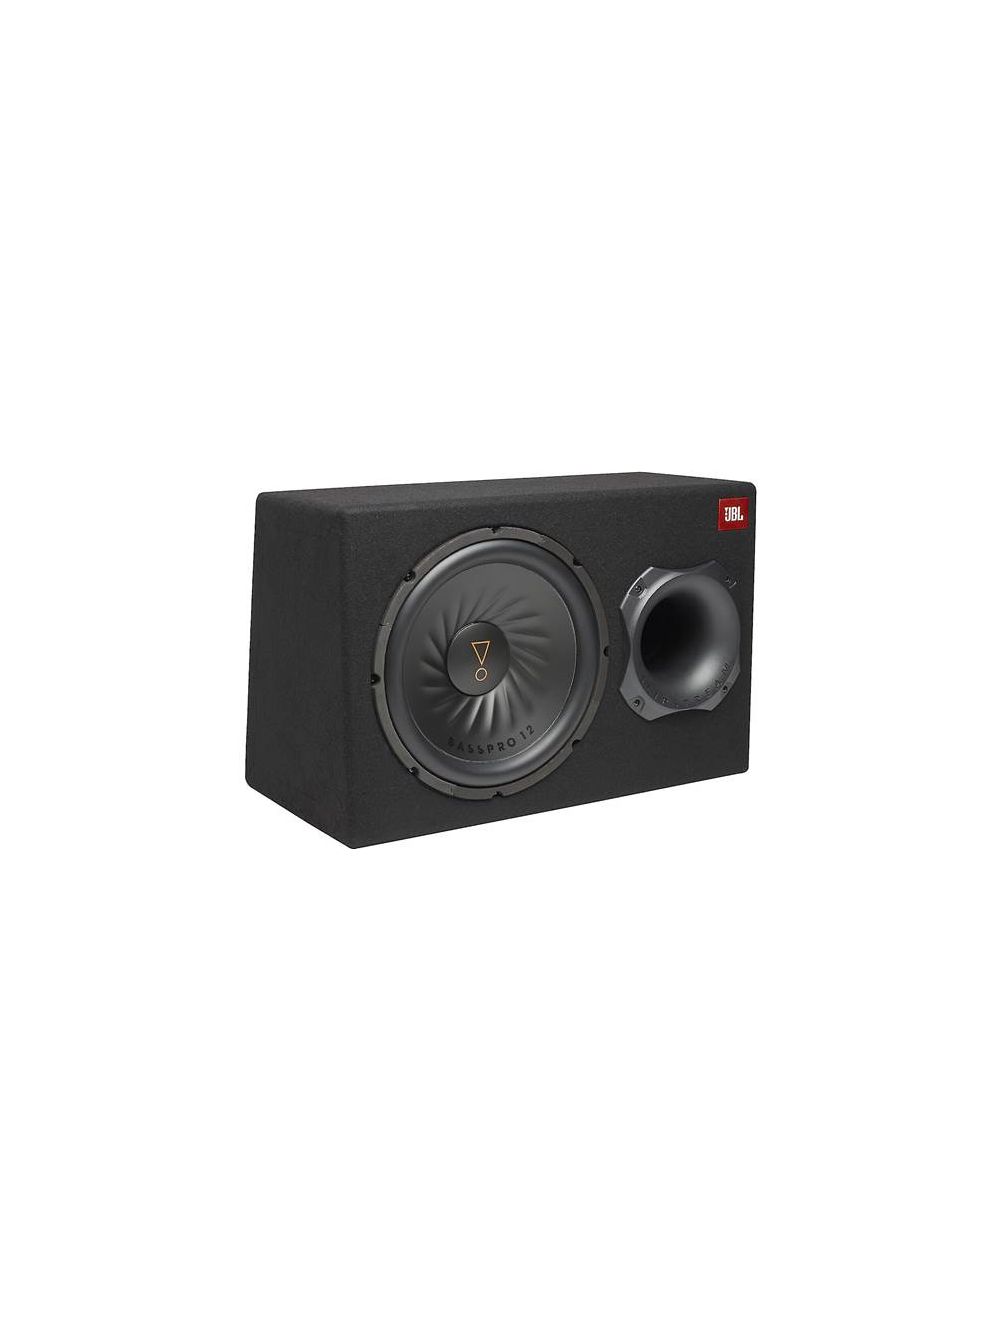 JBL BassPro 12Ported powered subwoofer with 12" sub and 150-watt amp